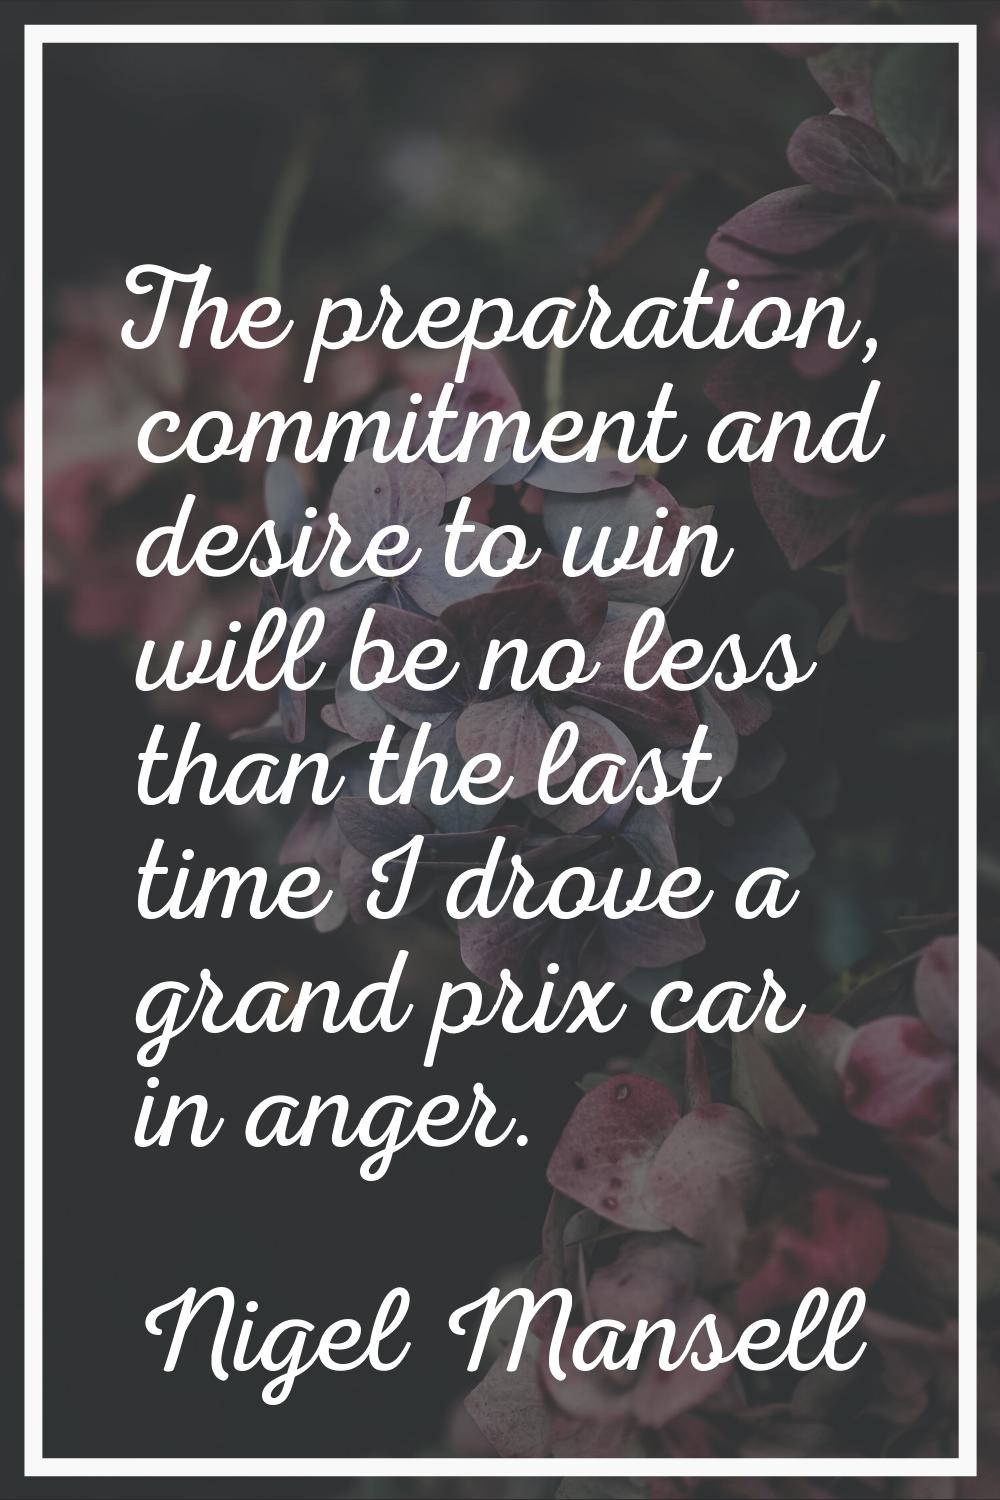 The preparation, commitment and desire to win will be no less than the last time I drove a grand pr